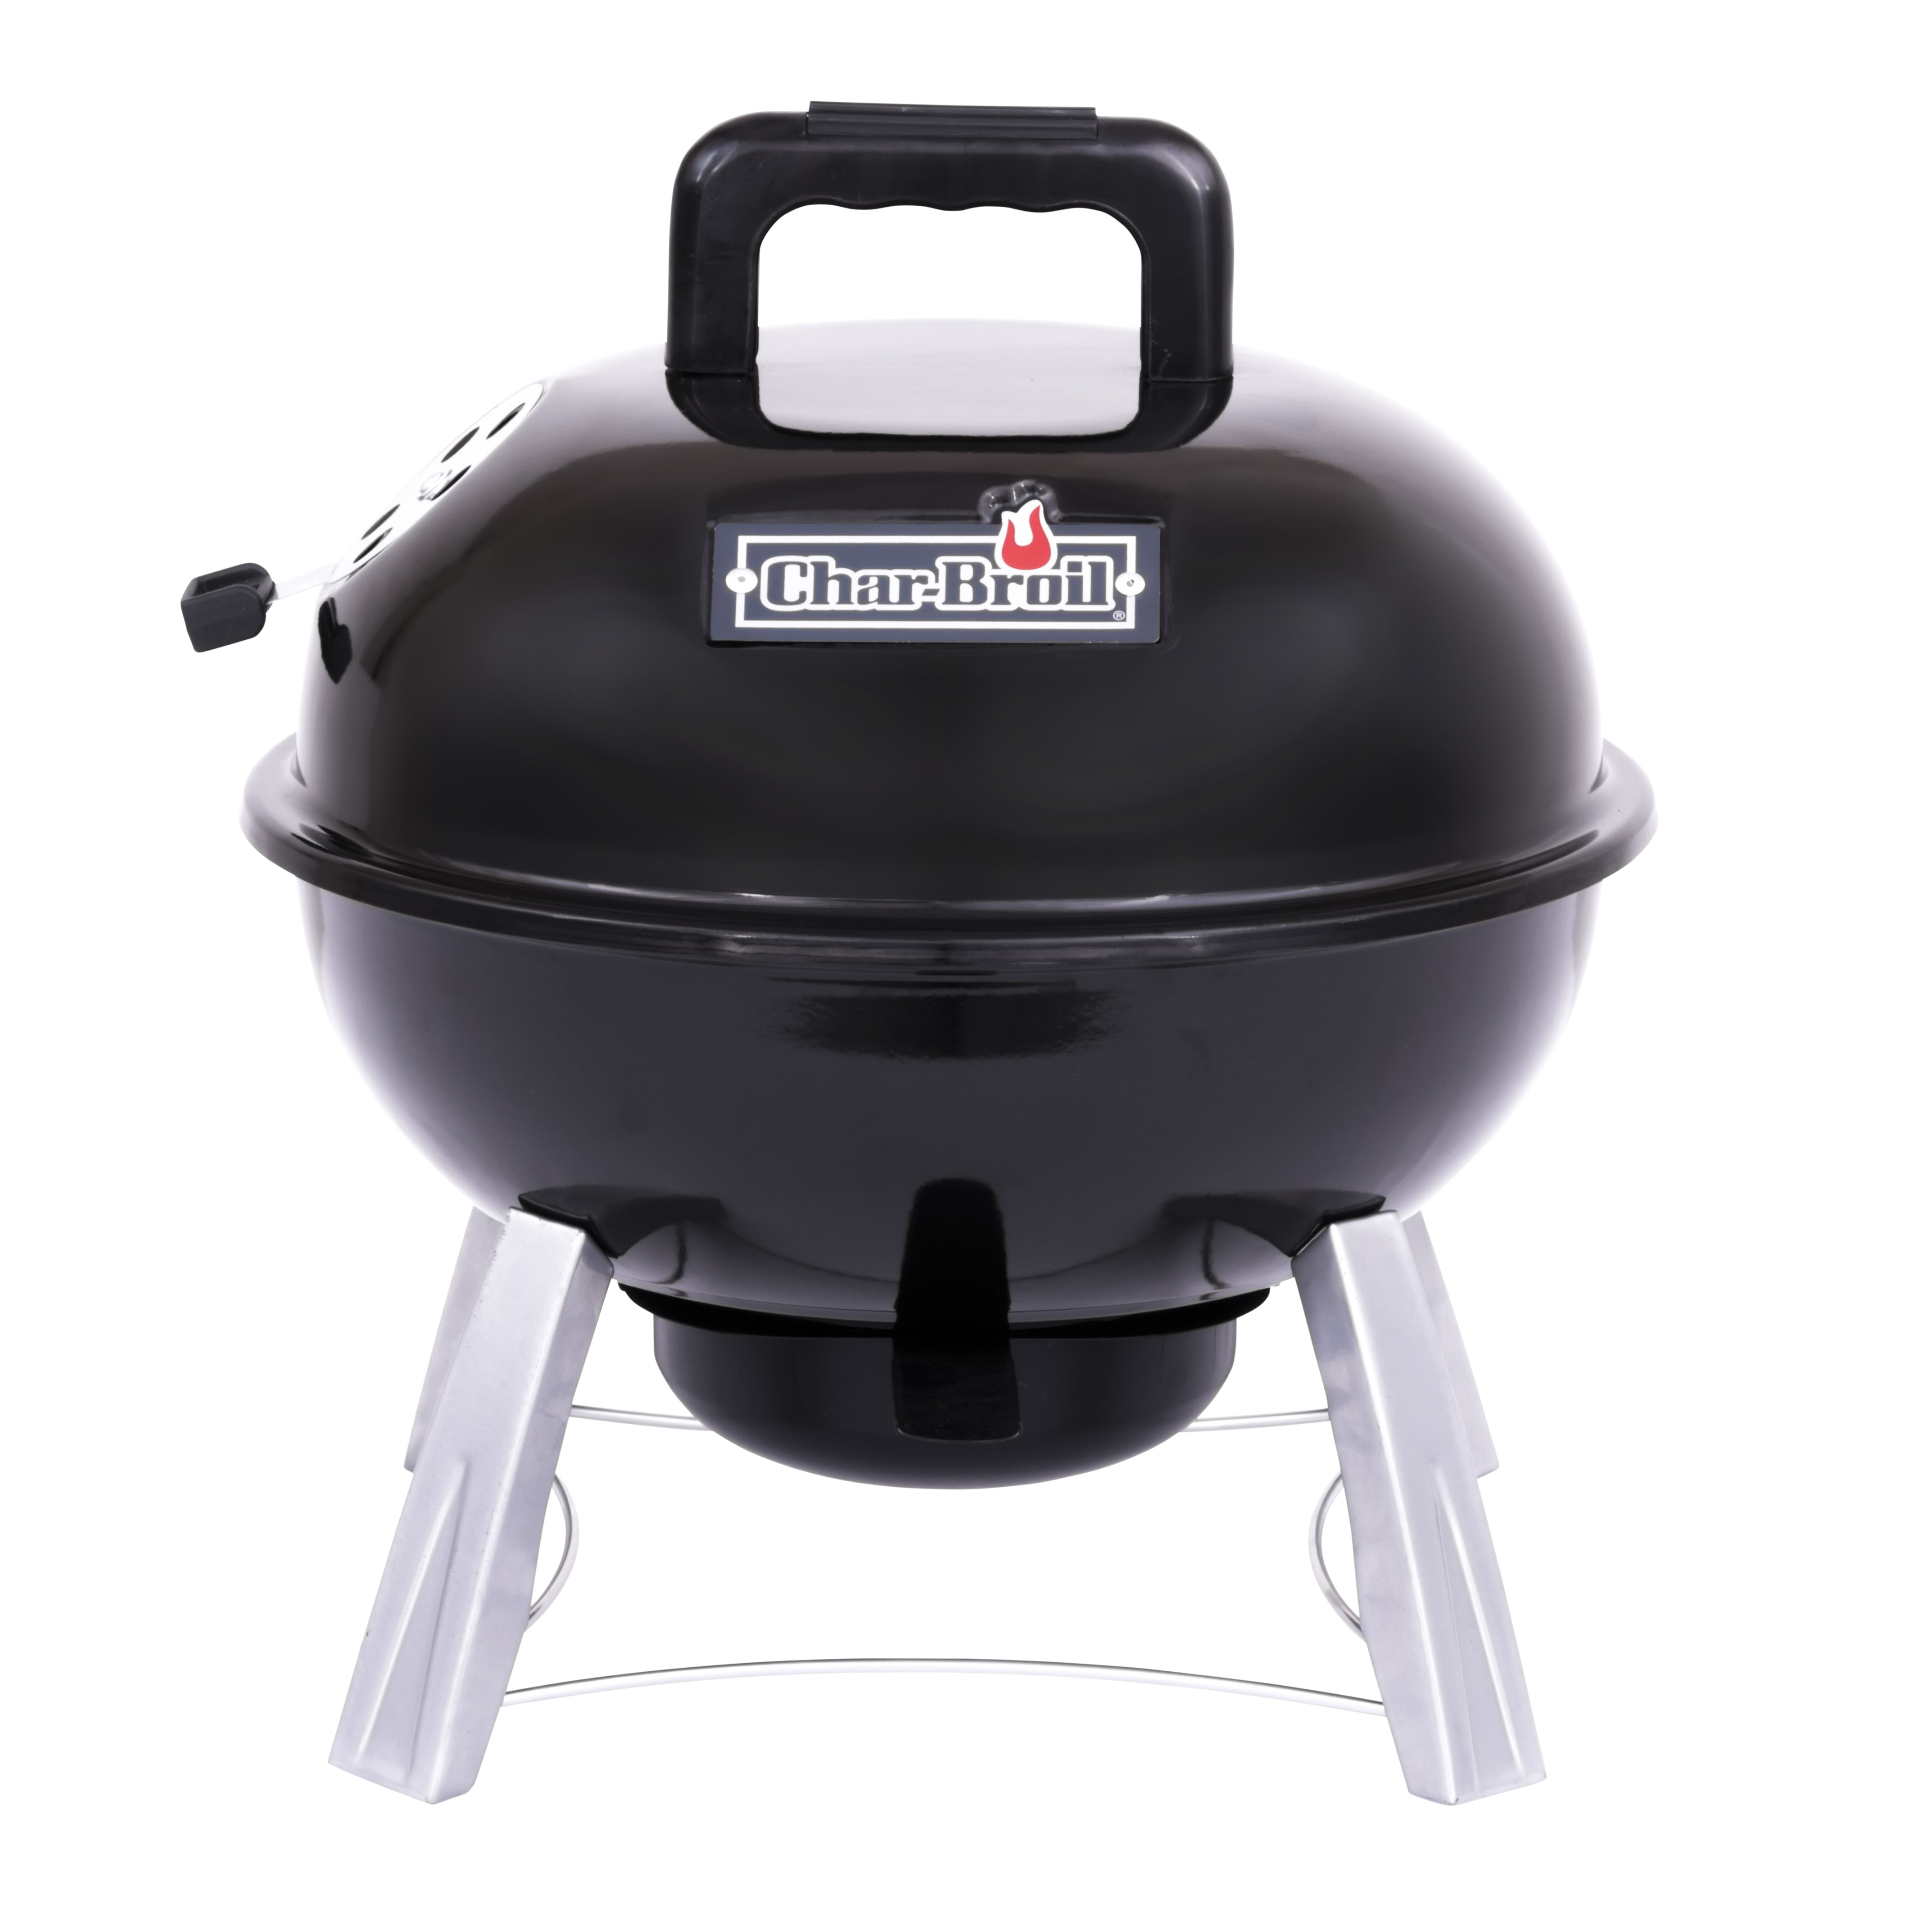 Char Broil 150 Portable Tabletop Kettle Charcoal Grill Walmart Com